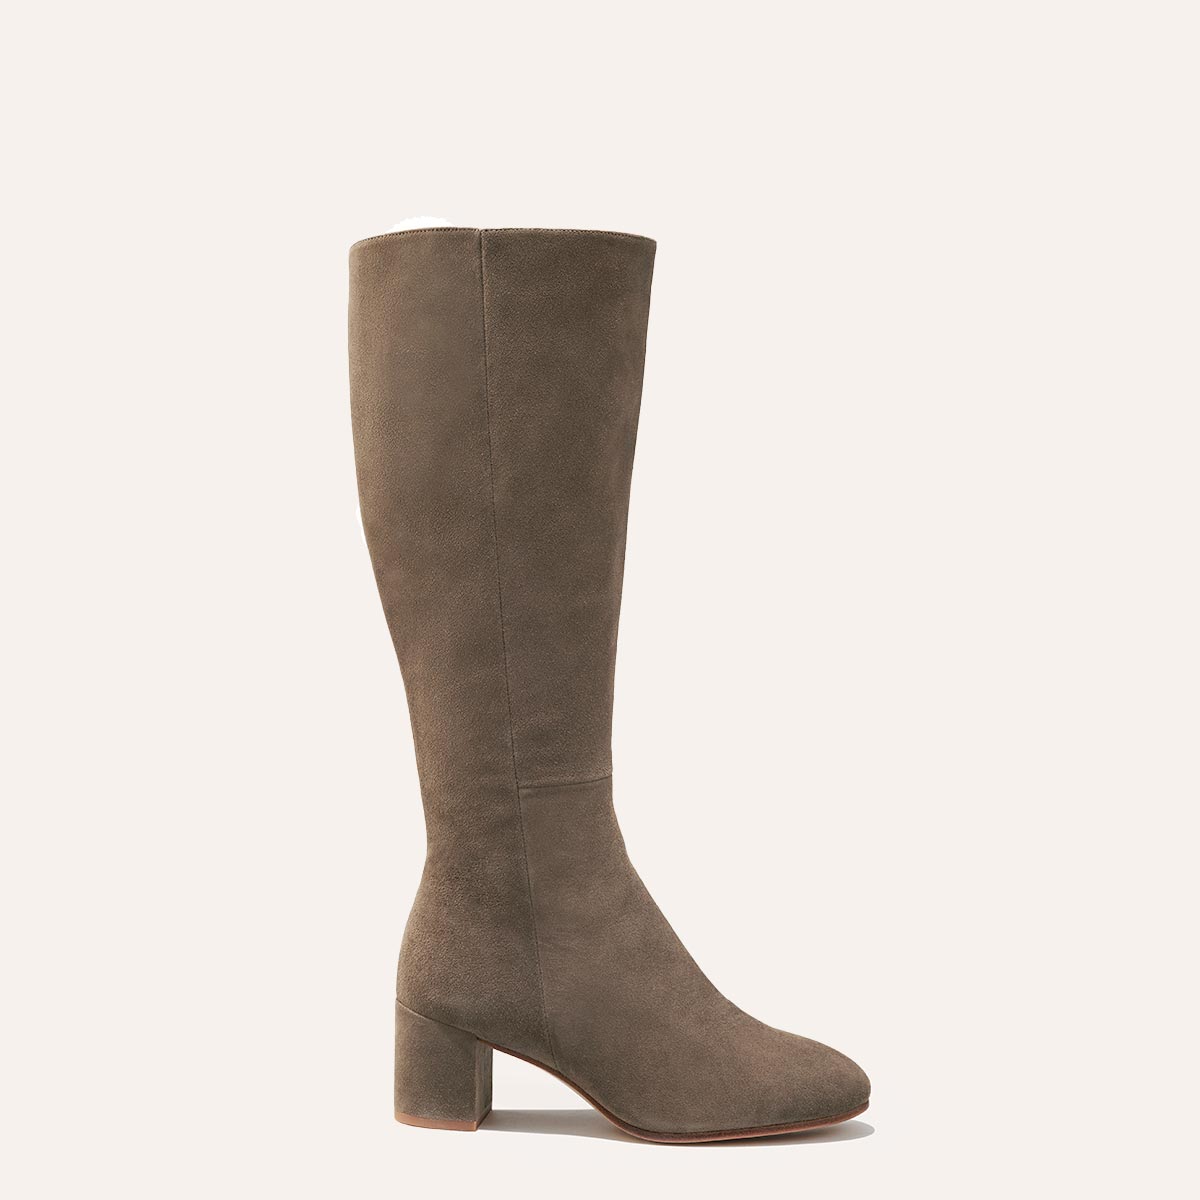 The Edie Boot - Taupe Suede